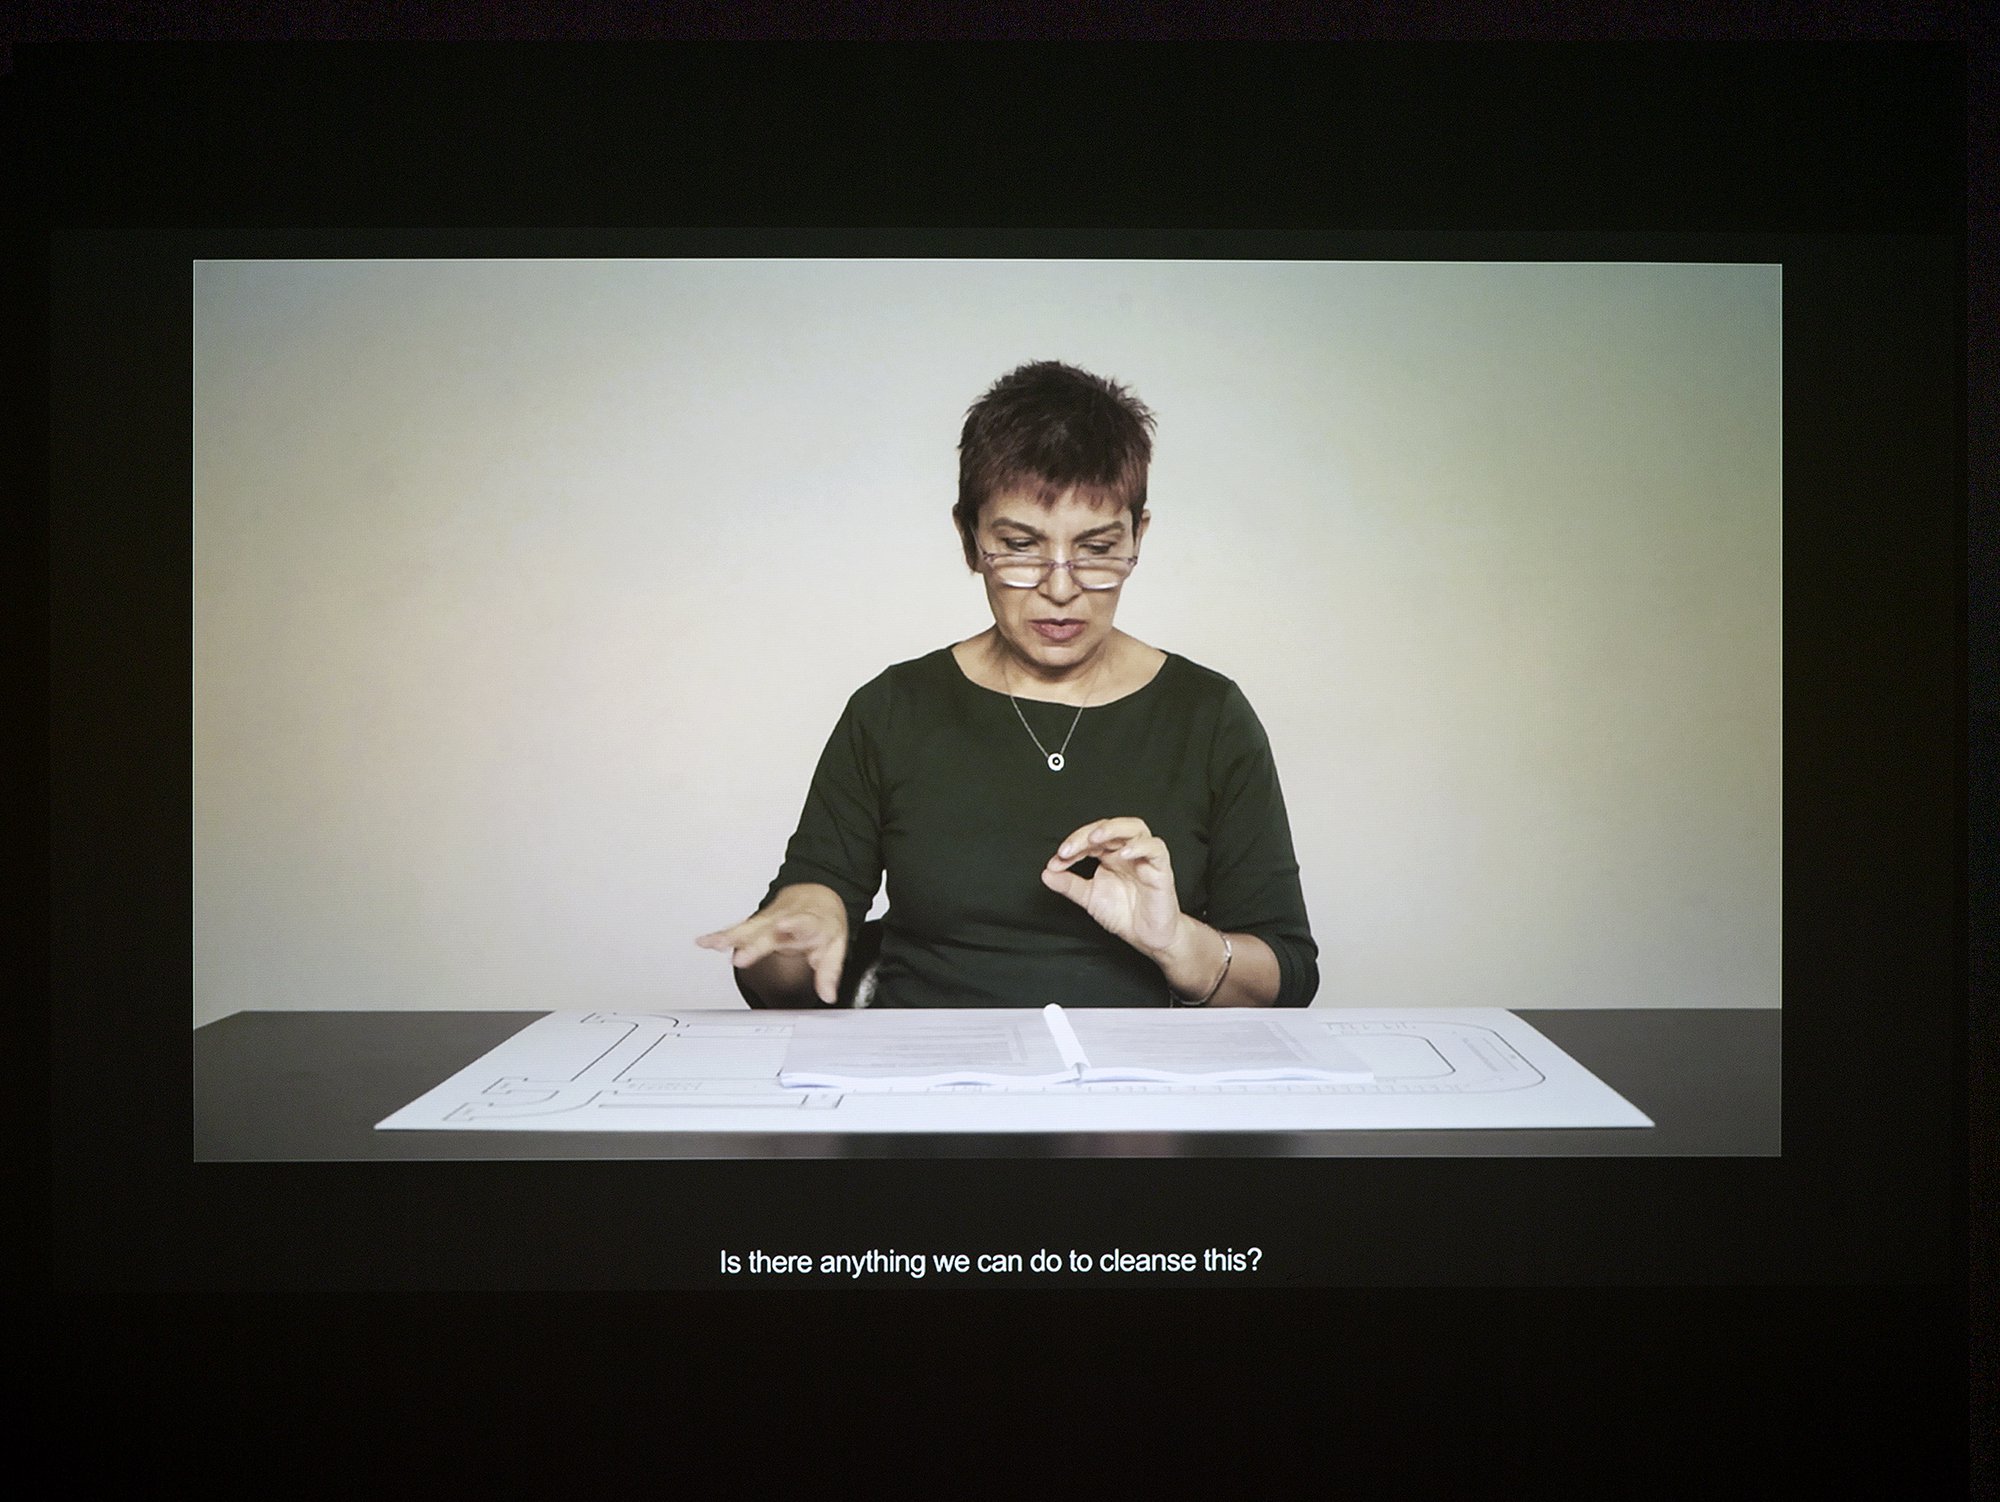 Banu Cennetoğlu-Yasemin Özcan, What is it that you are worried about?, single channel HD video, 35 min., 2013. Installation view, What is it that you are worried about?, Rodeo, Istanbul, 2014